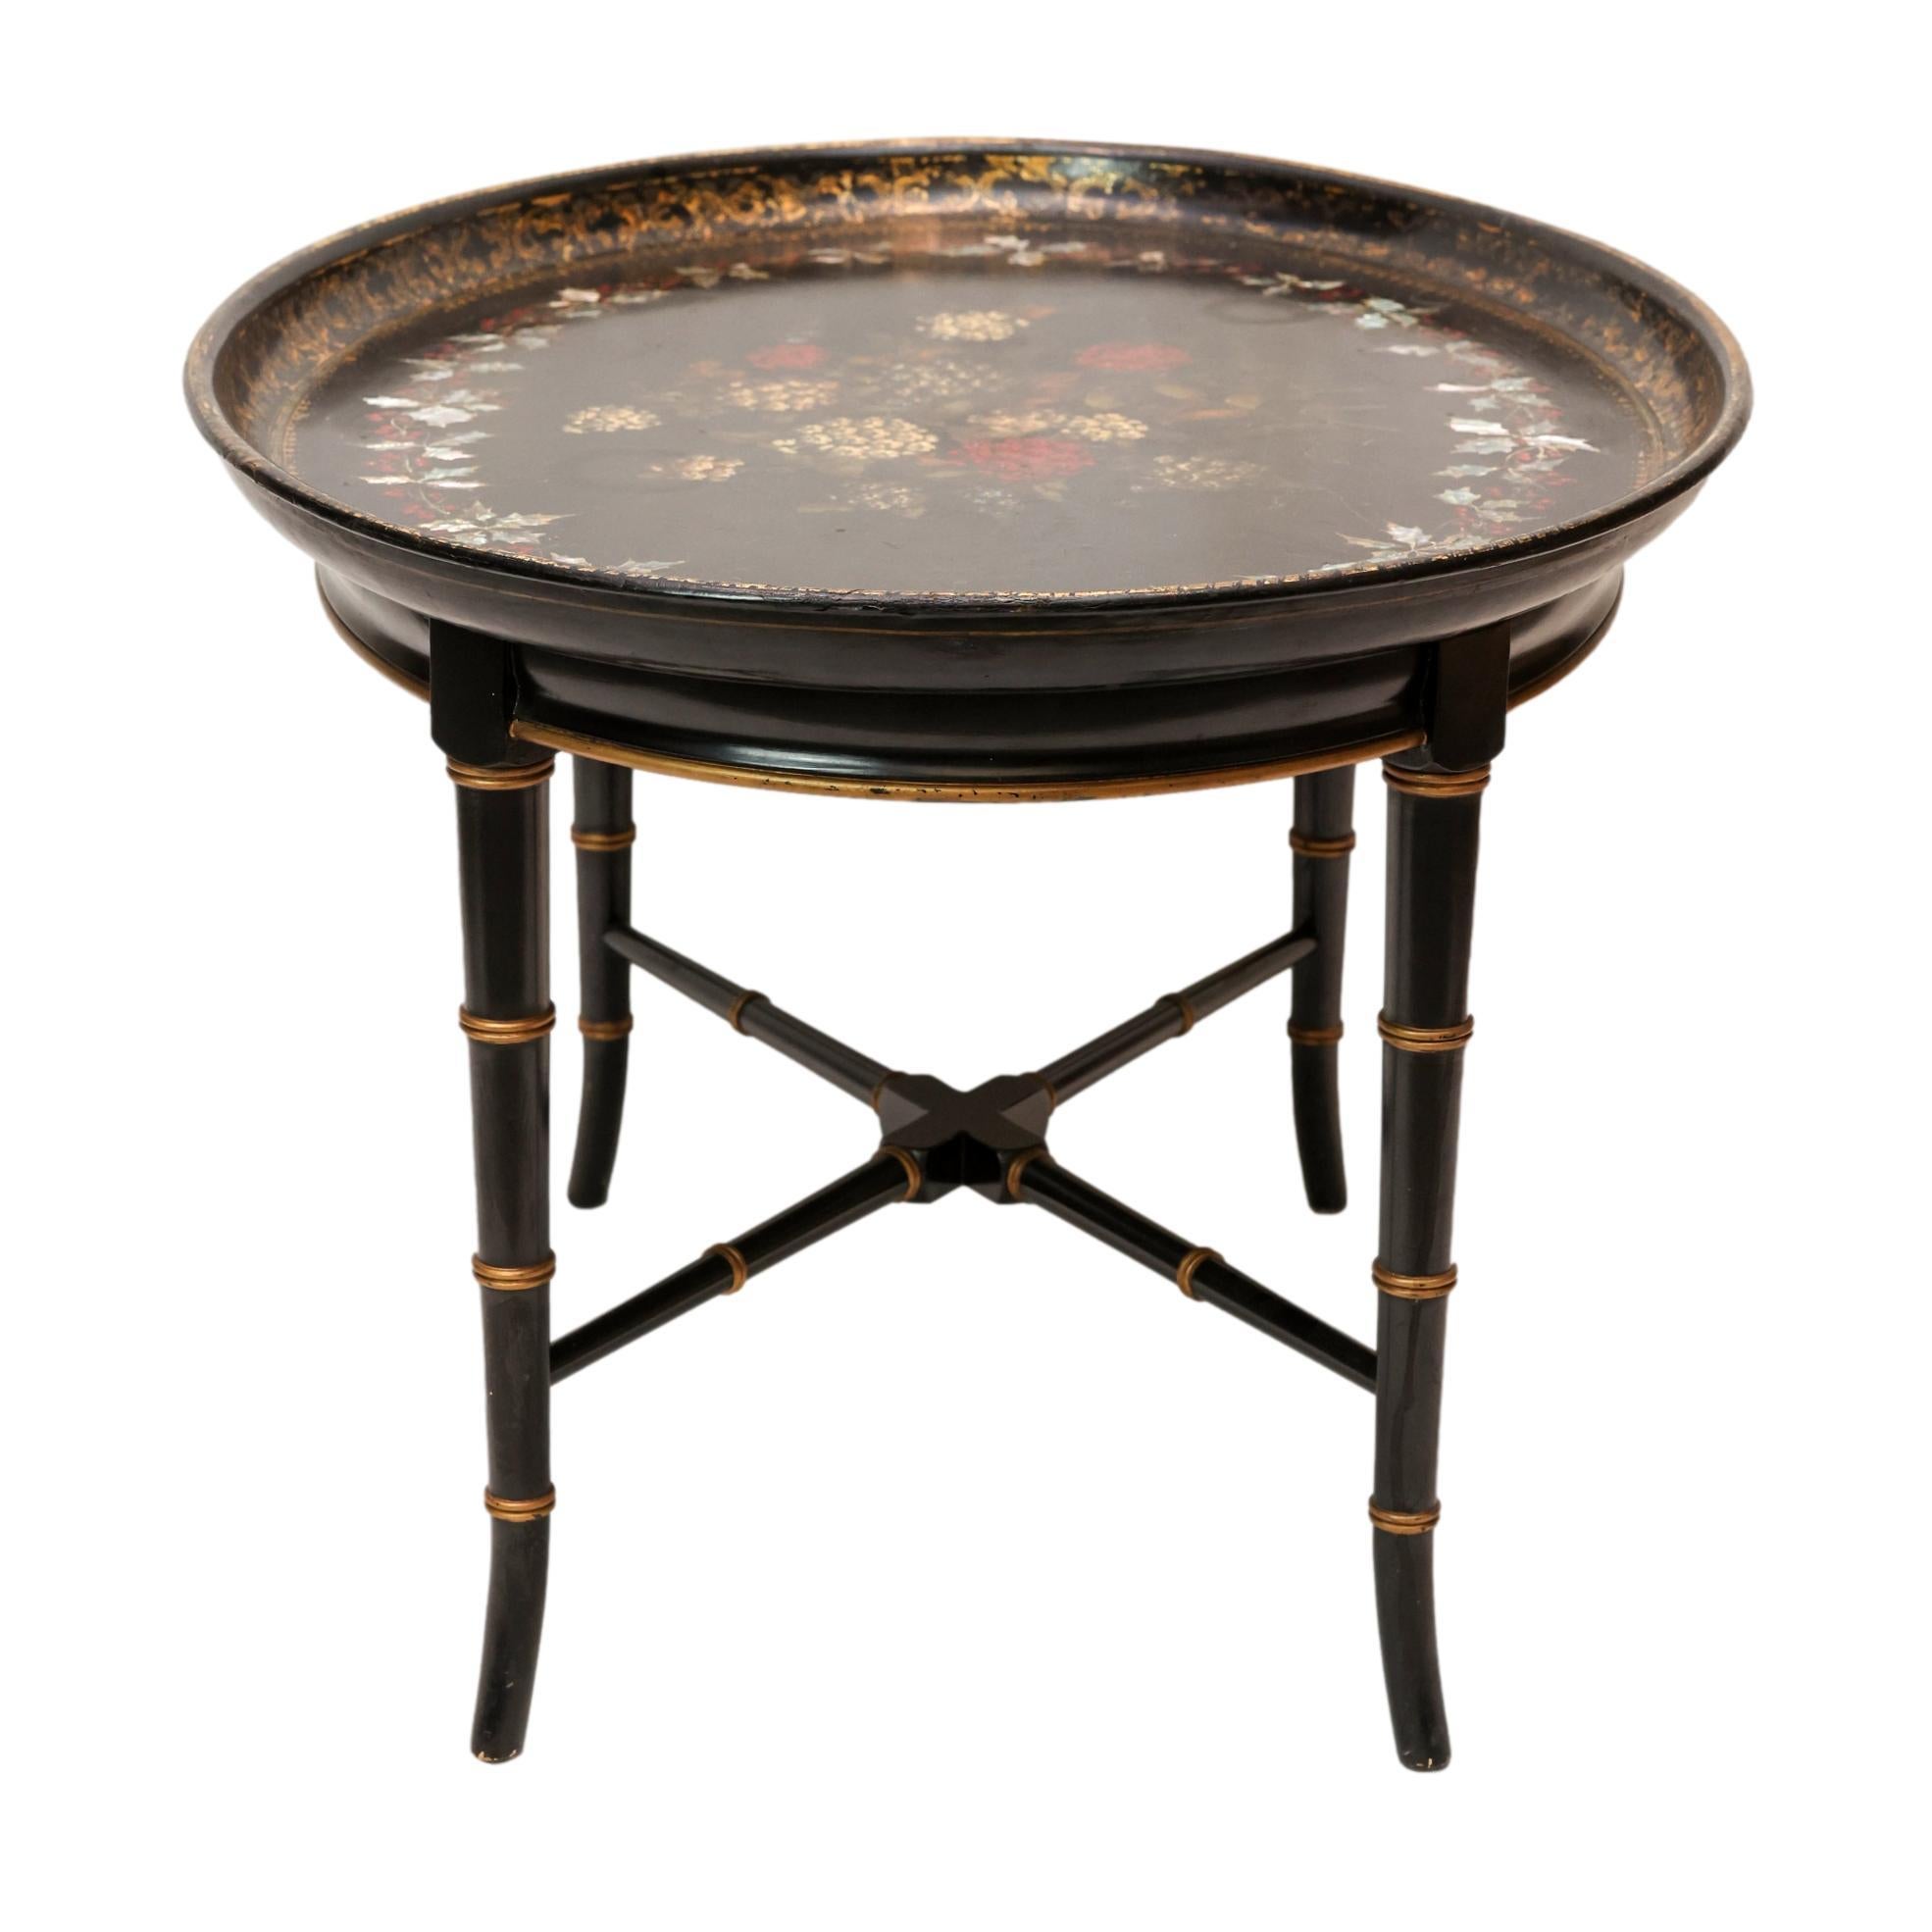 19th Century Mother-of-Pearl Inlaid and Ebonized Paper Mache Tray Table, English, ca. 1850 For Sale